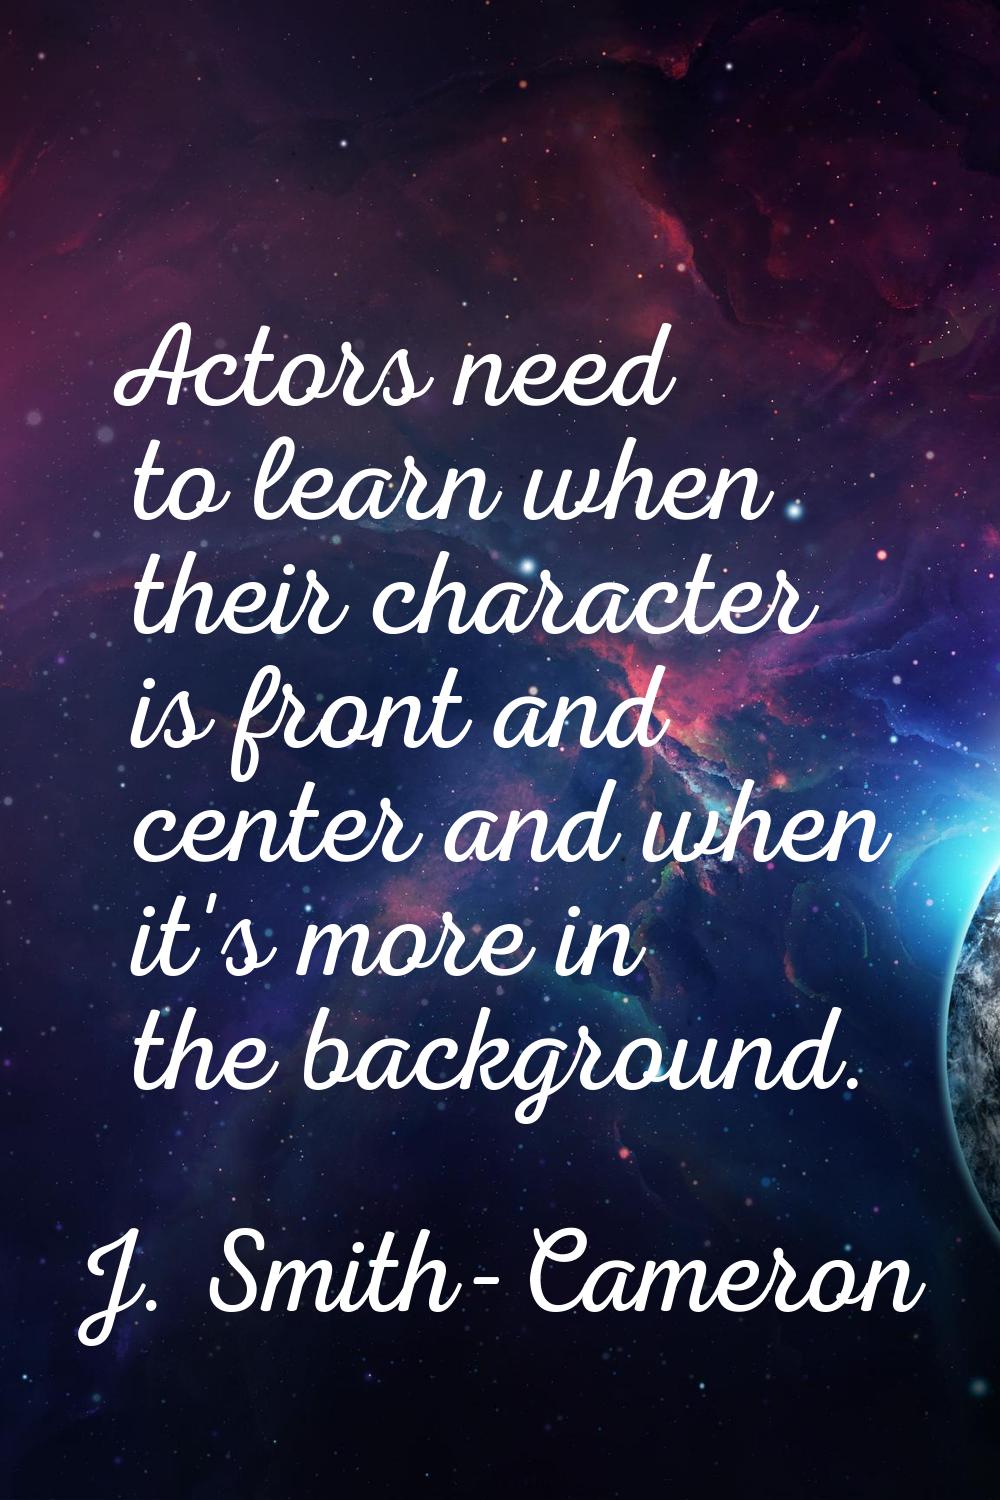 Actors need to learn when their character is front and center and when it's more in the background.